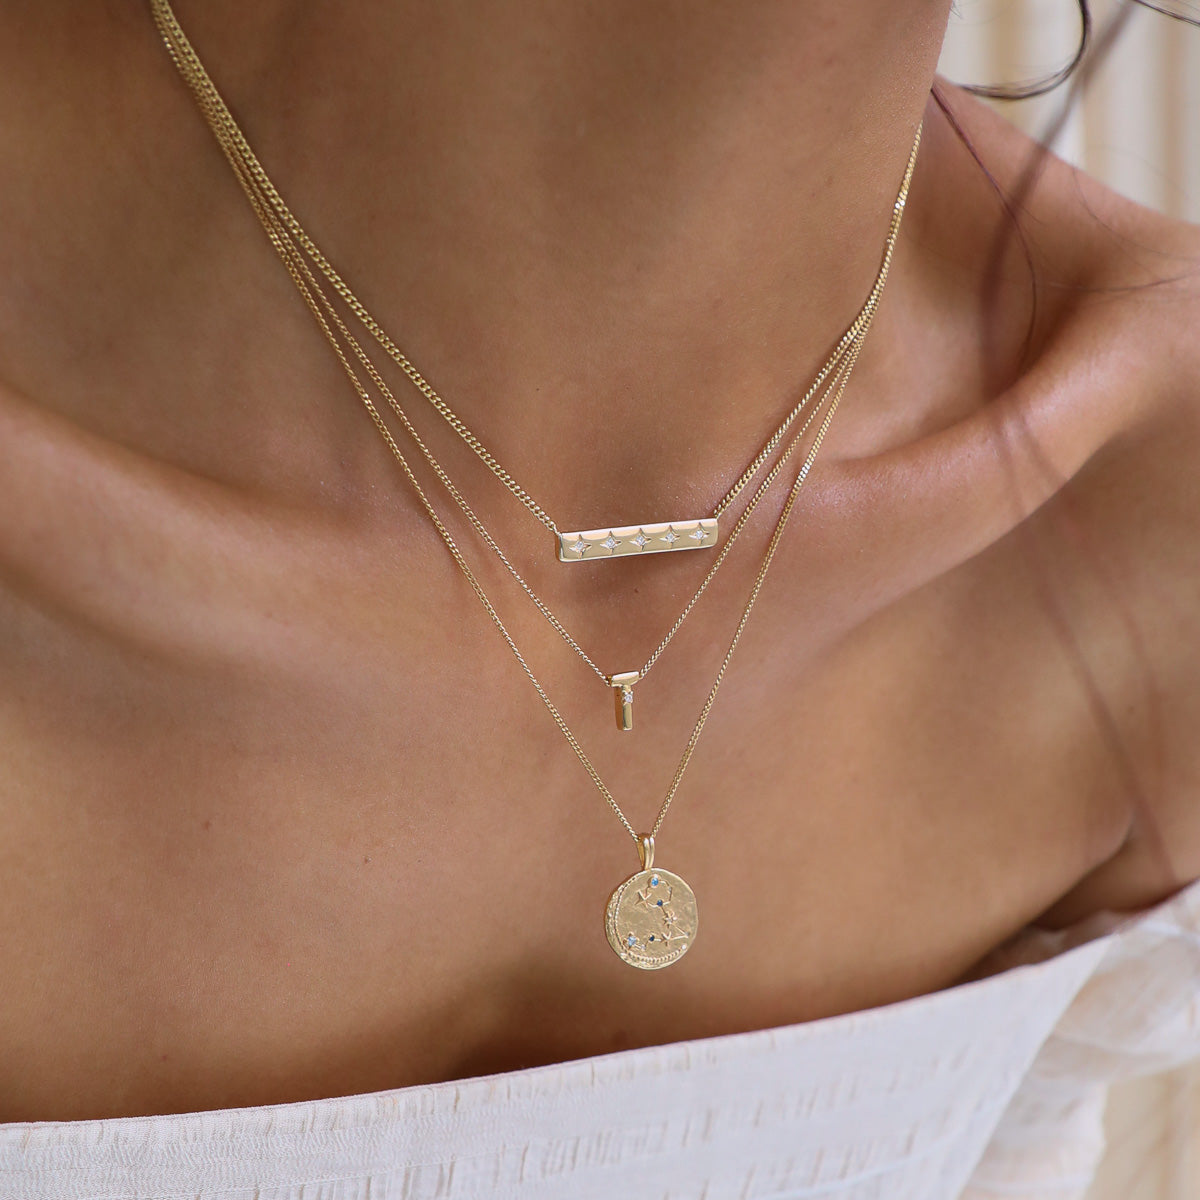 Cosmic Star Bar Necklace in Gold worn layered with initial pendant necklace and zodiac pendant necklace